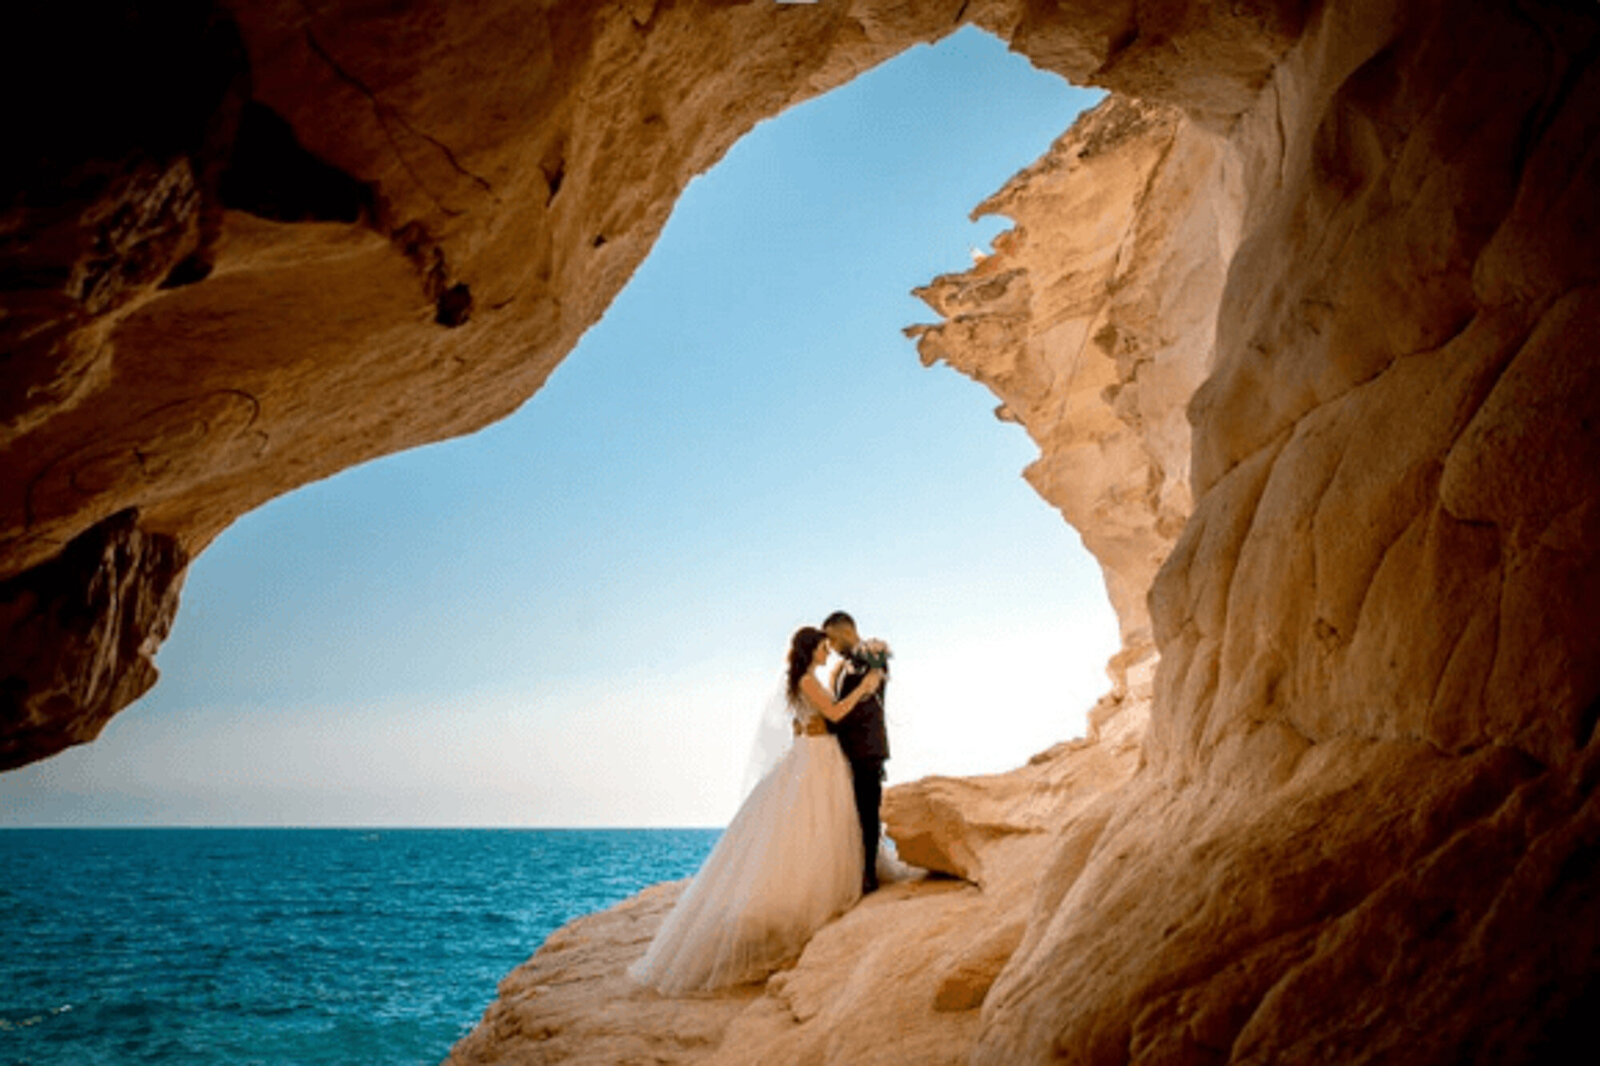 Bride and groom looking at each other under a rock formation on the beach